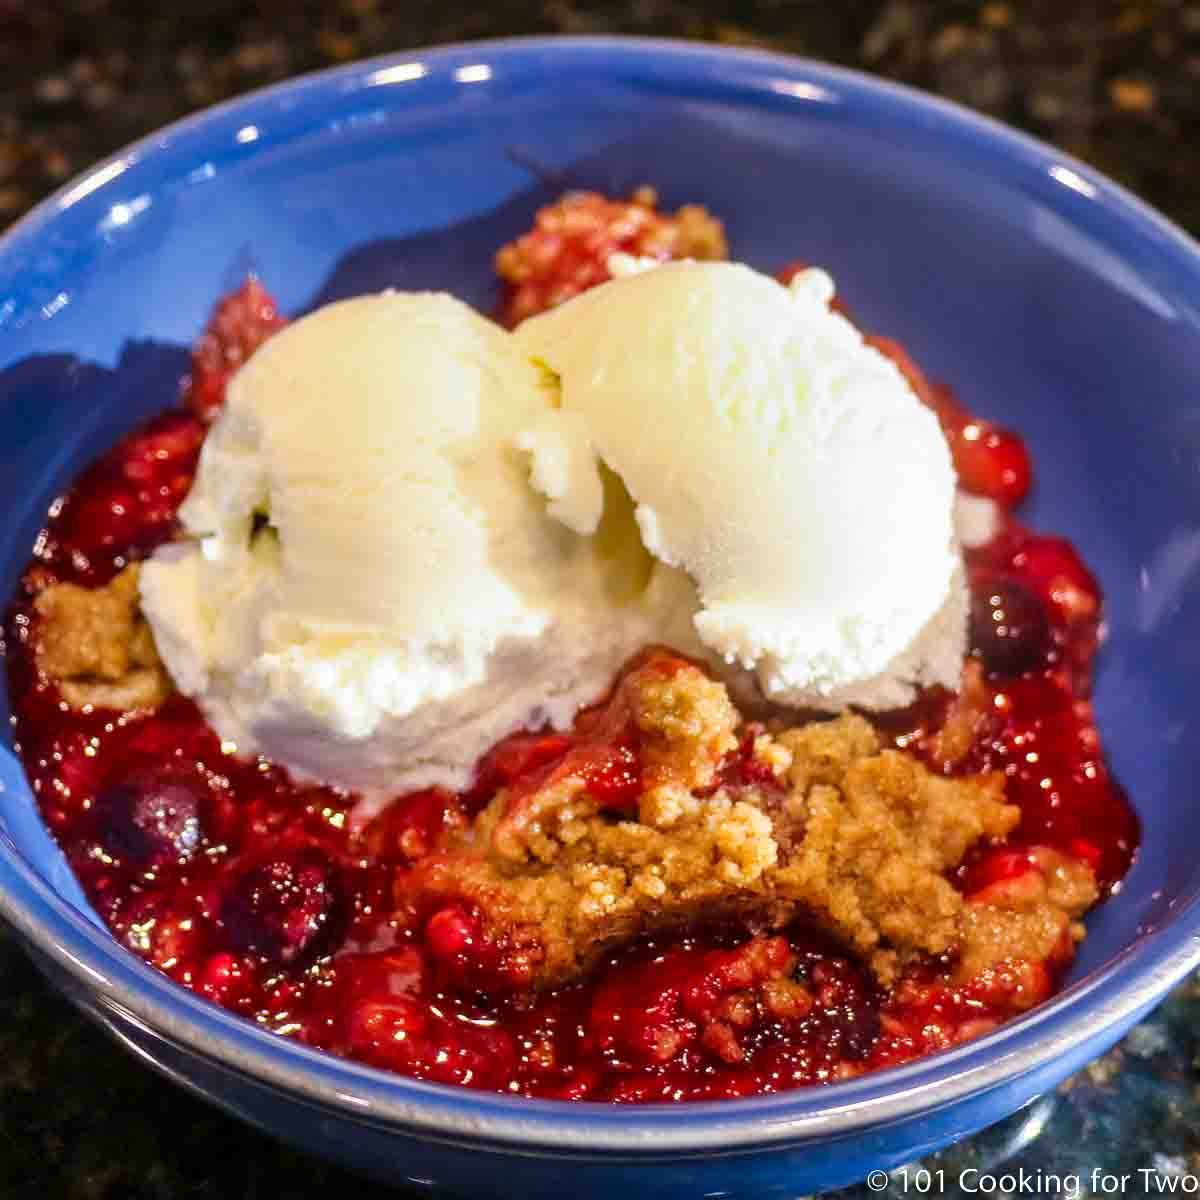 image of ice cream on fruit crumble on a blue plate